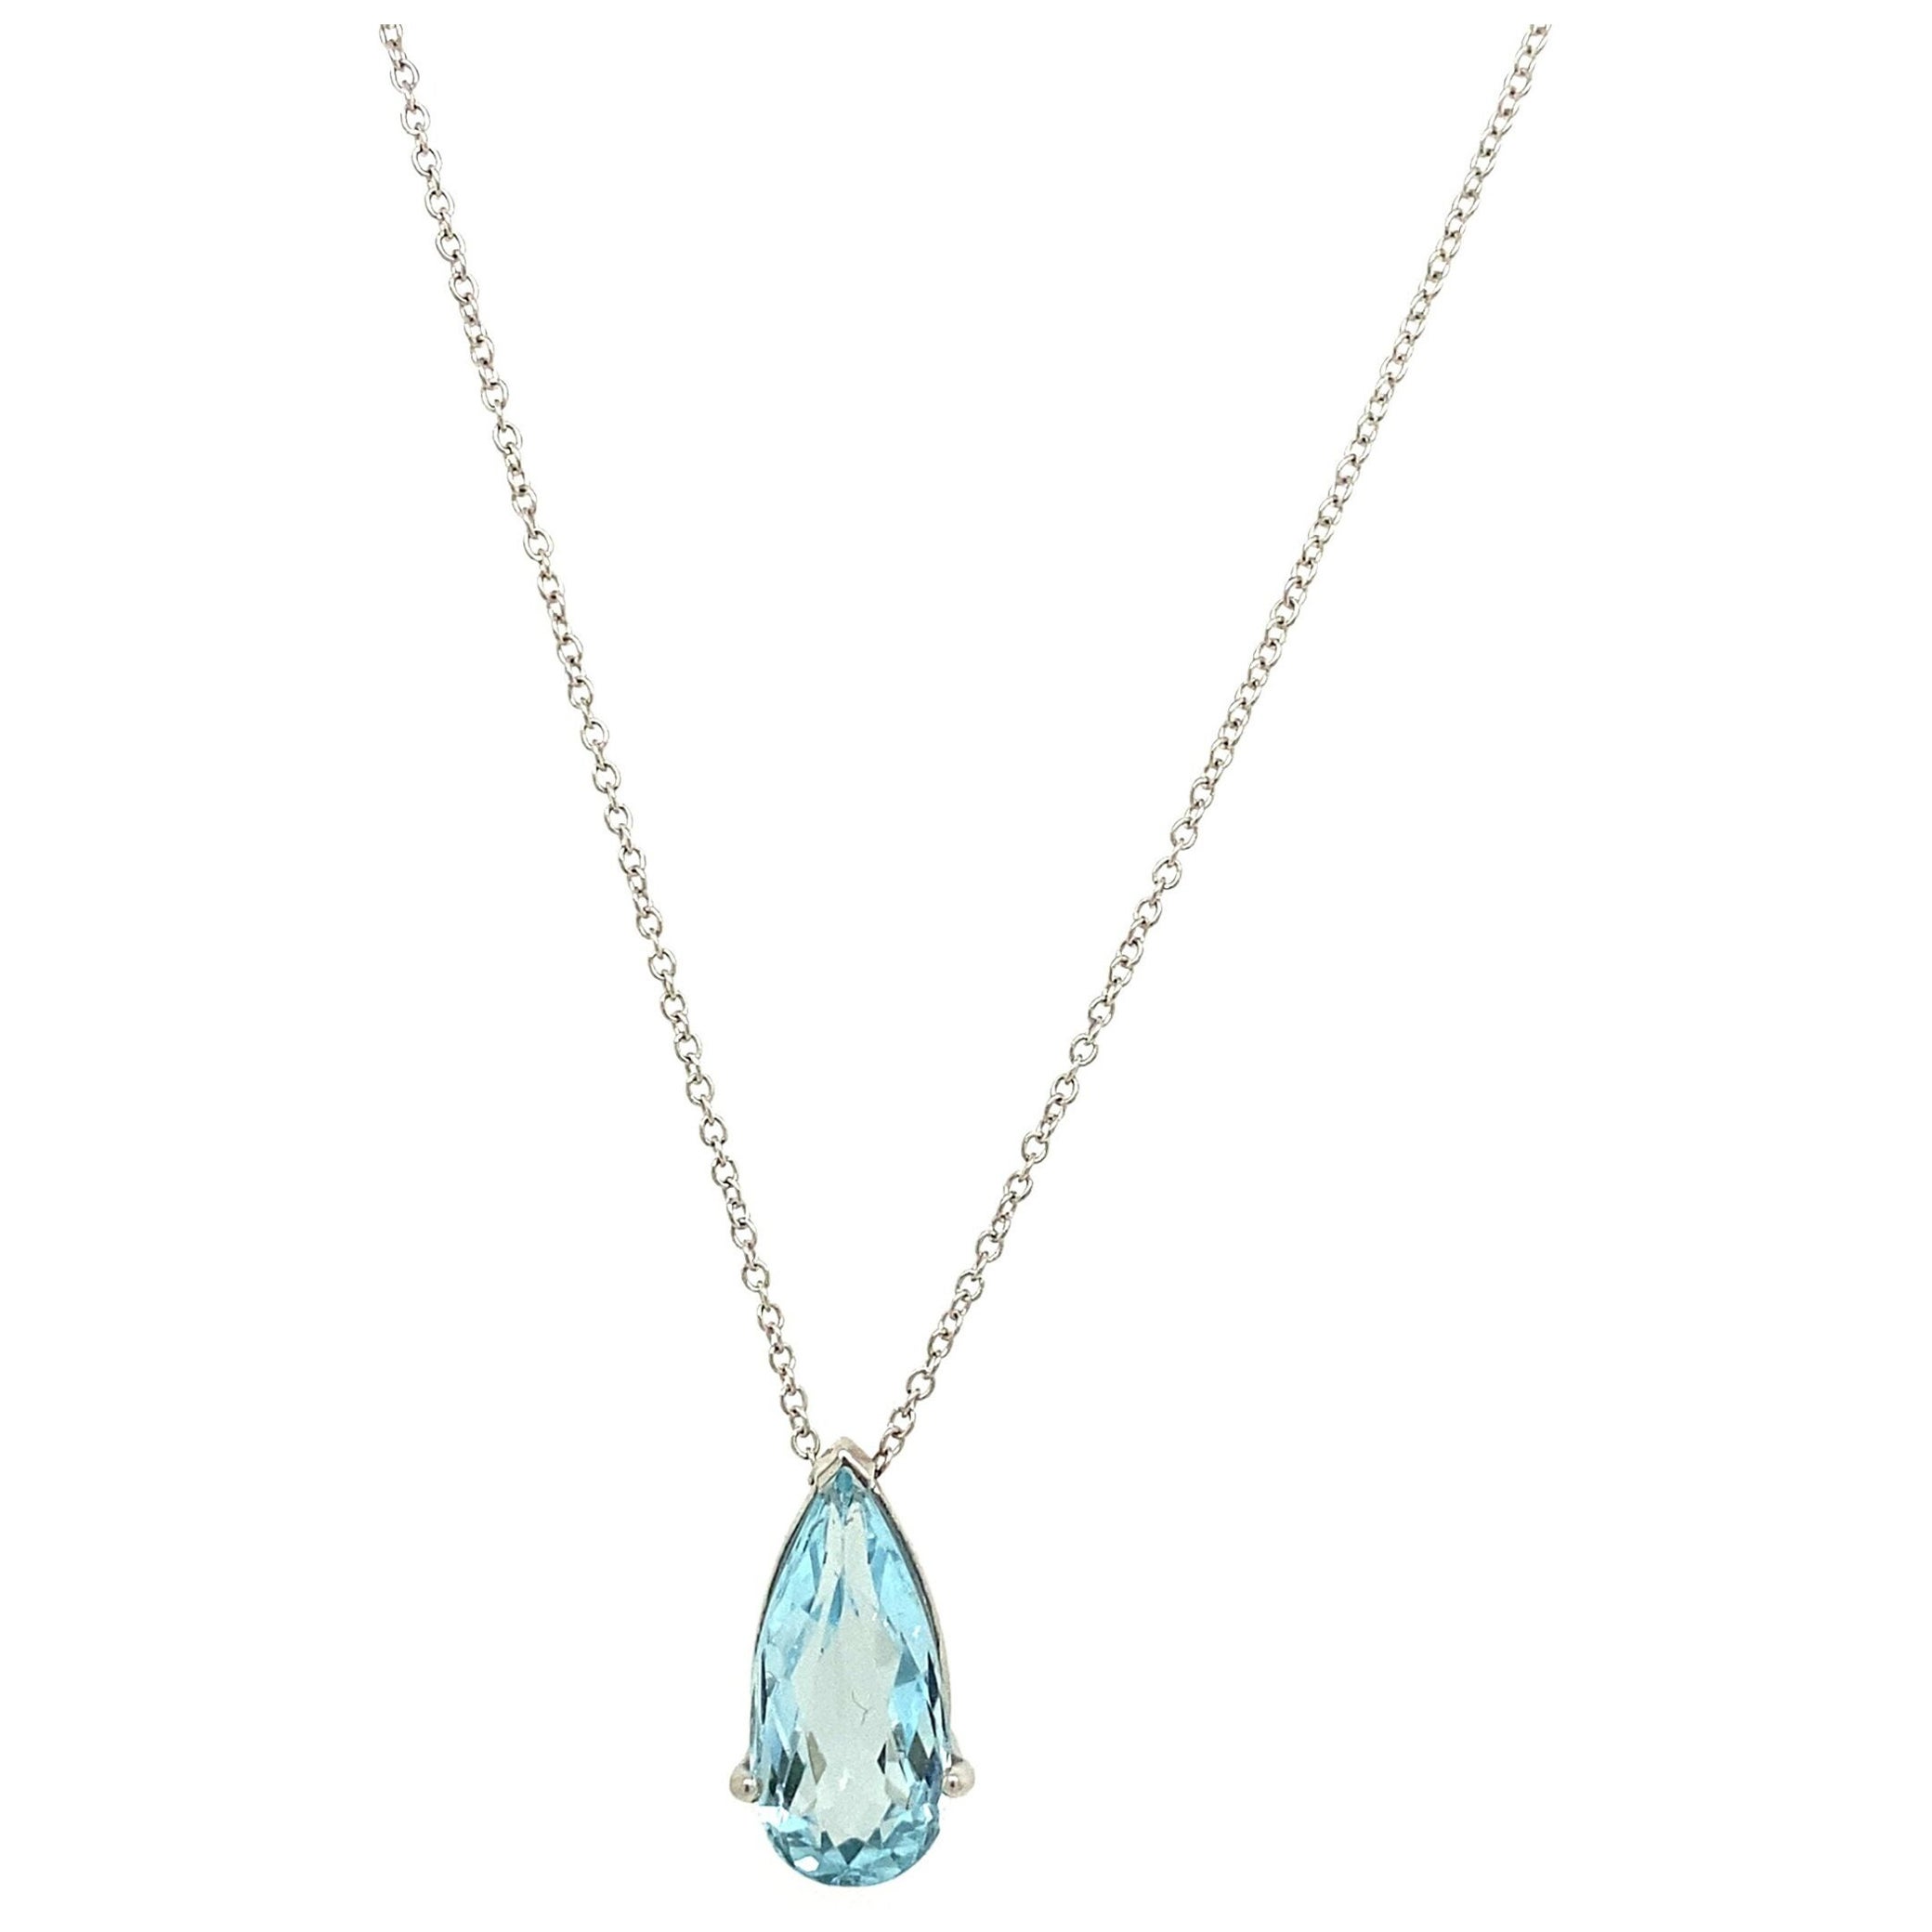 Fine Quality 3.32ct Pear Shape Aquamarine Pendant & Chain in 18ct White Gold For Sale